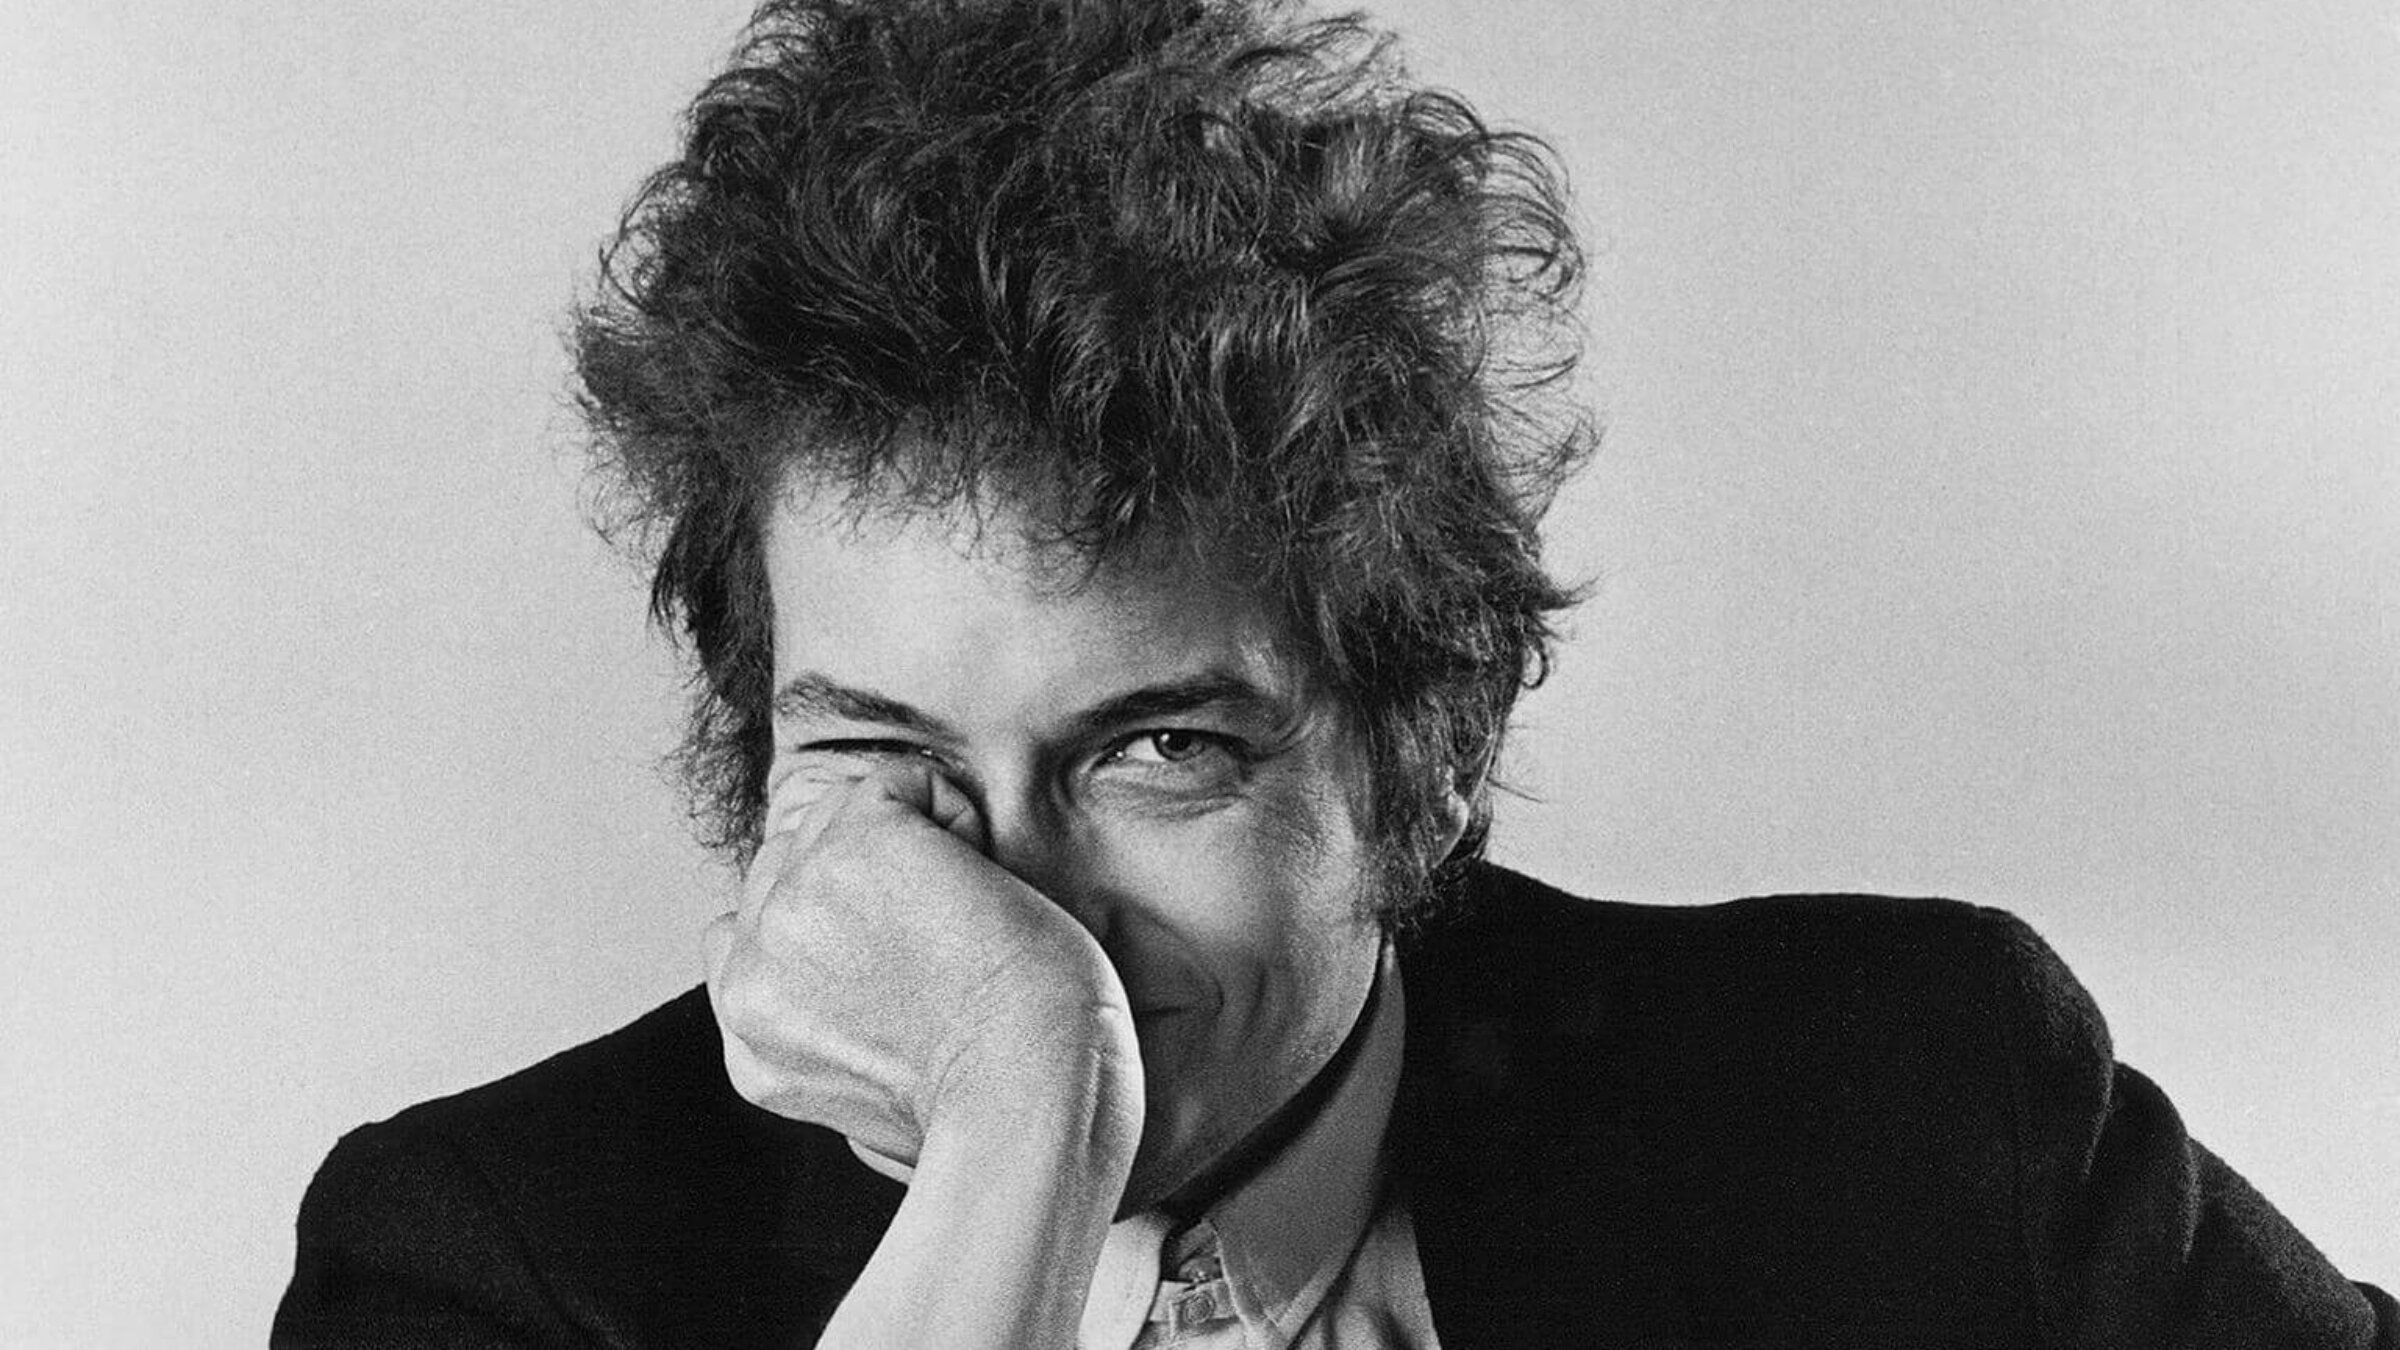 Photographer Daniel Kramer said he and Dylan developed a rapport because they shared similar backgrounds and interests. They were "like cousins," he said.